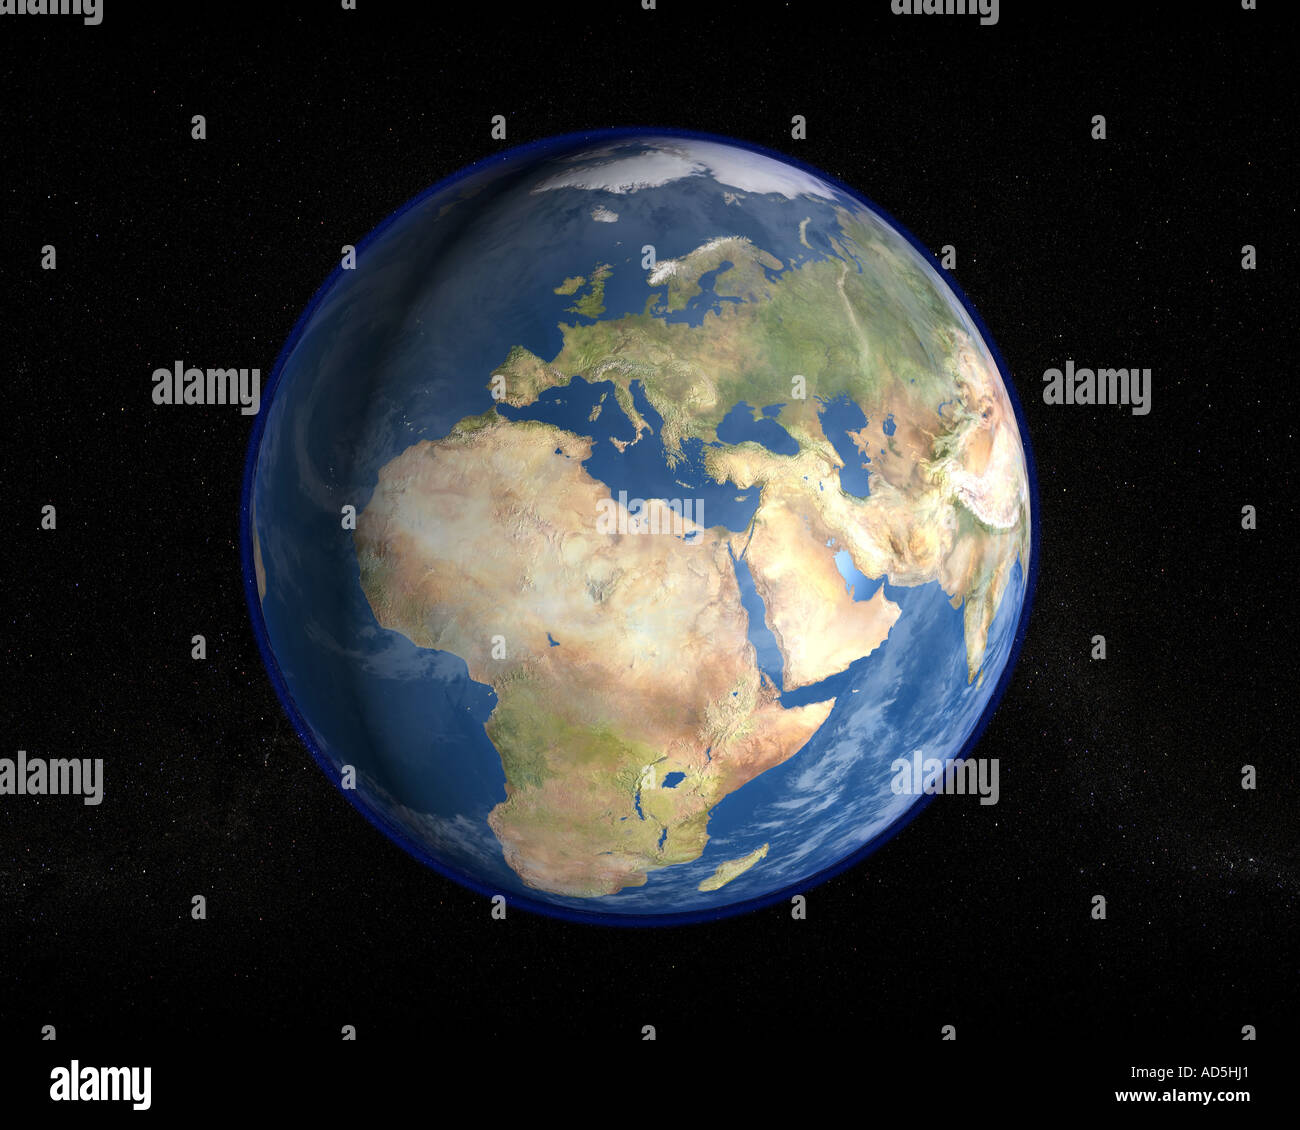 The planet earth as seen from space in a high resolution photorealistic rendered image Stock Photo